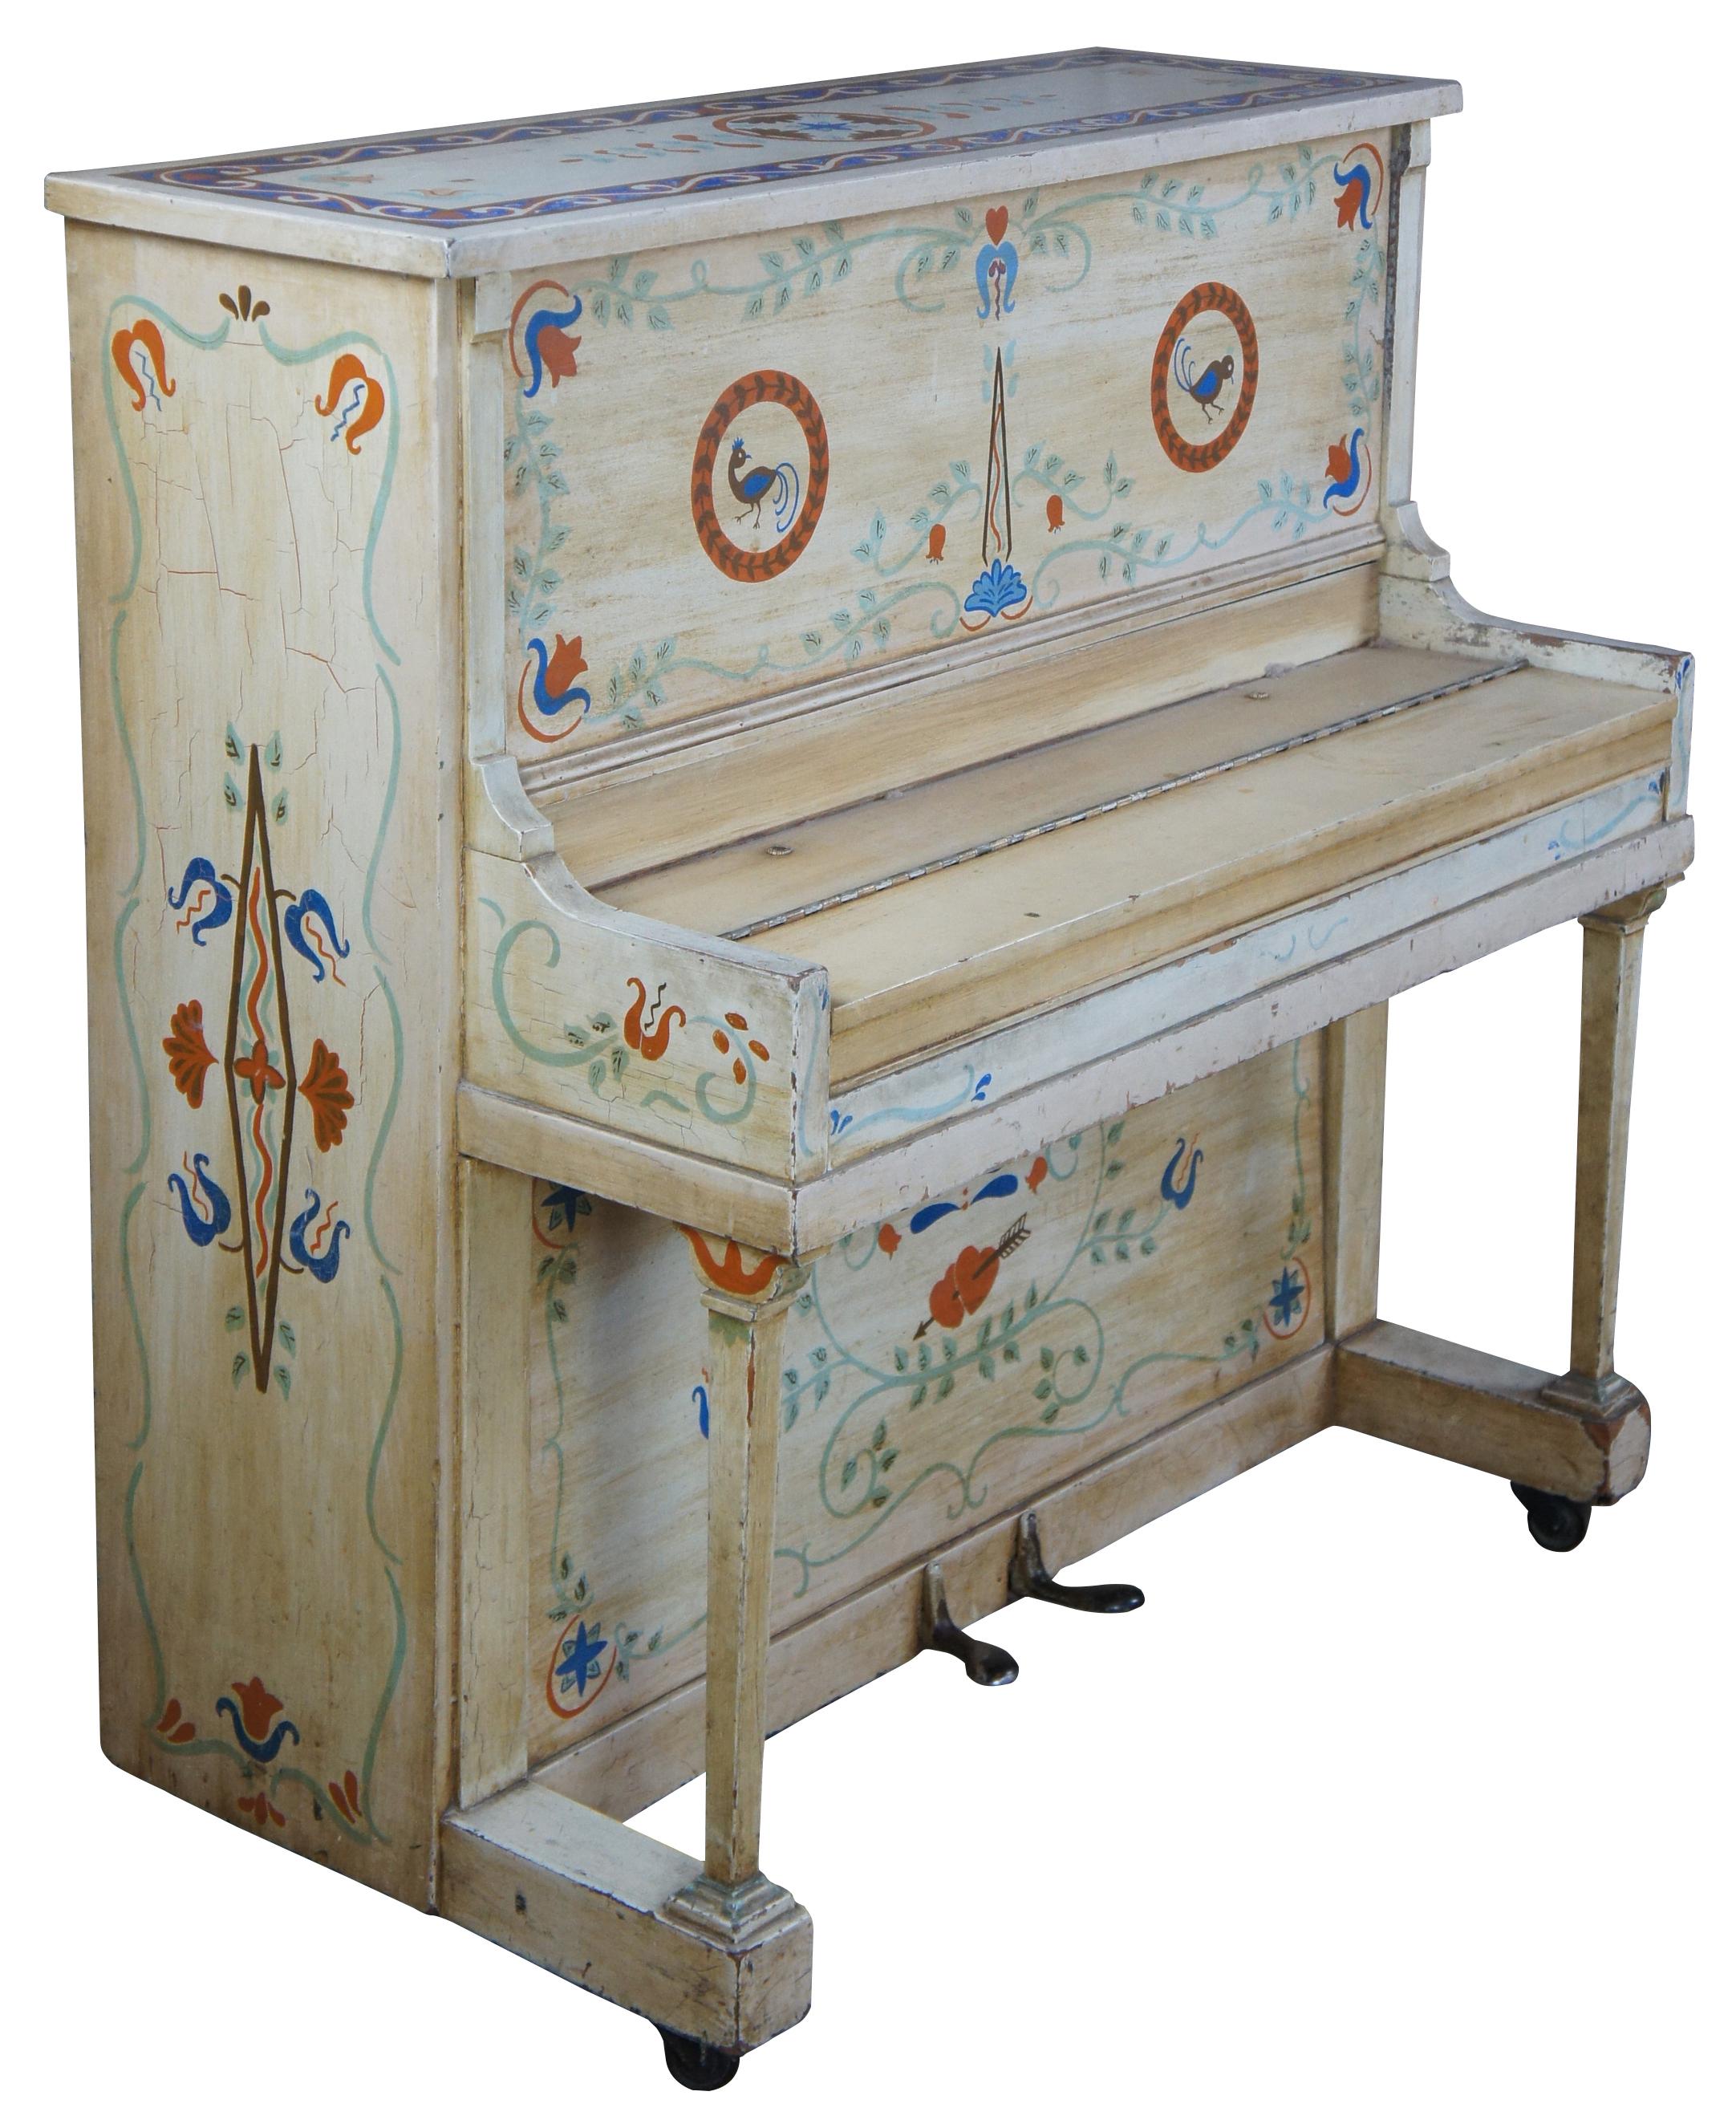 Wurlitzer upright piano, circa 1930-1935. Features a colorful hand painted exterior with roosters and flowers. Model # 117253. Perfect for use in studios or learner due to its smaller scale. Measure: 41